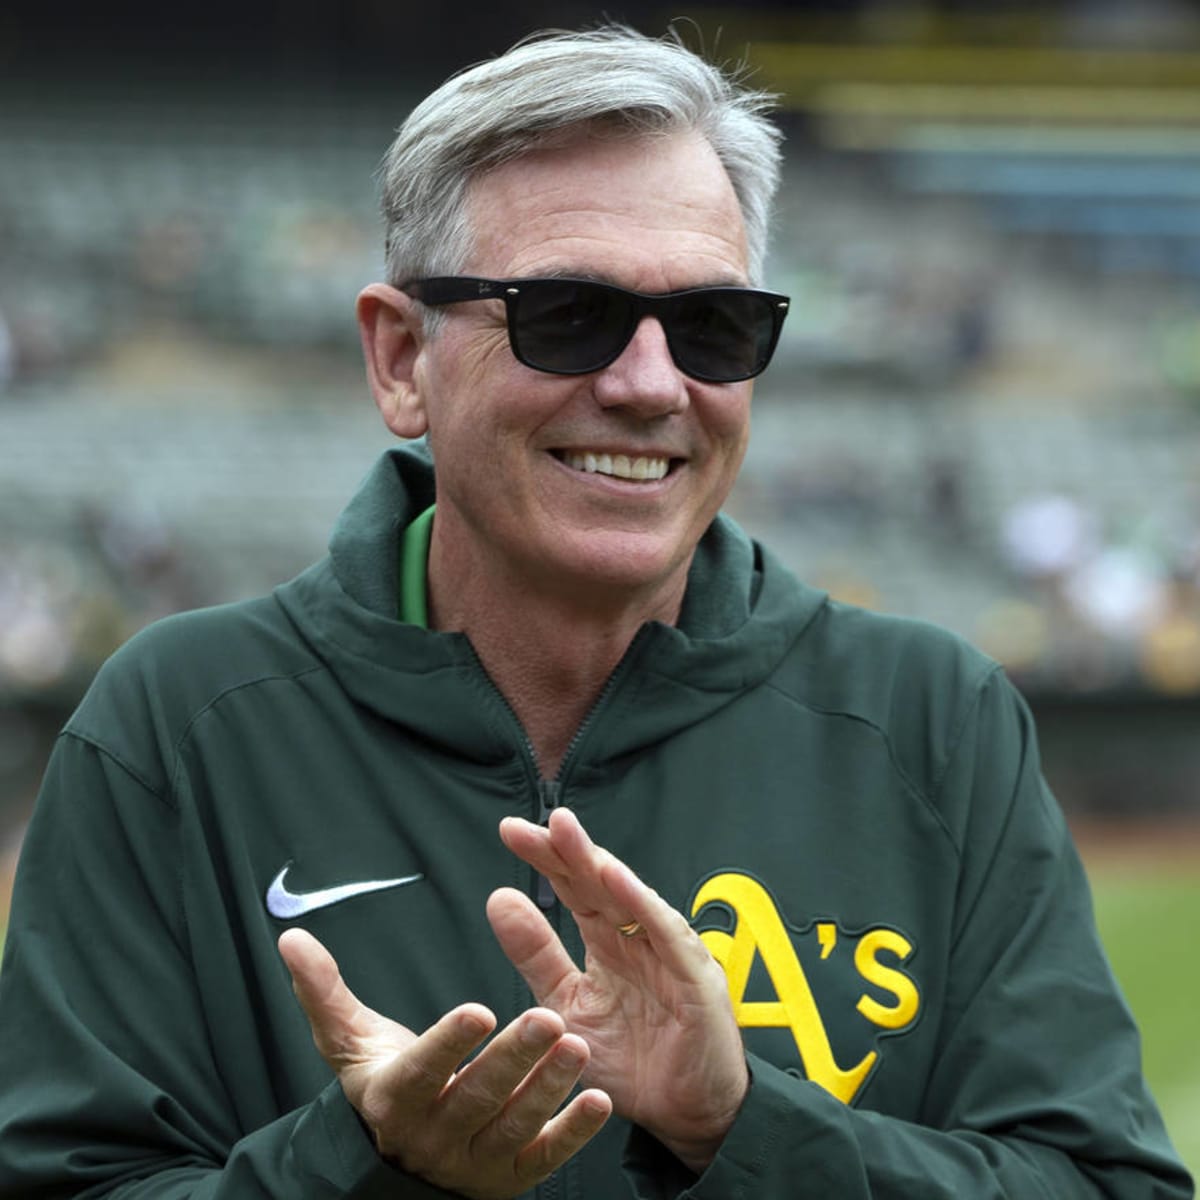 Do Mets have a shot at landing 'Moneyball' star Billy Beane?